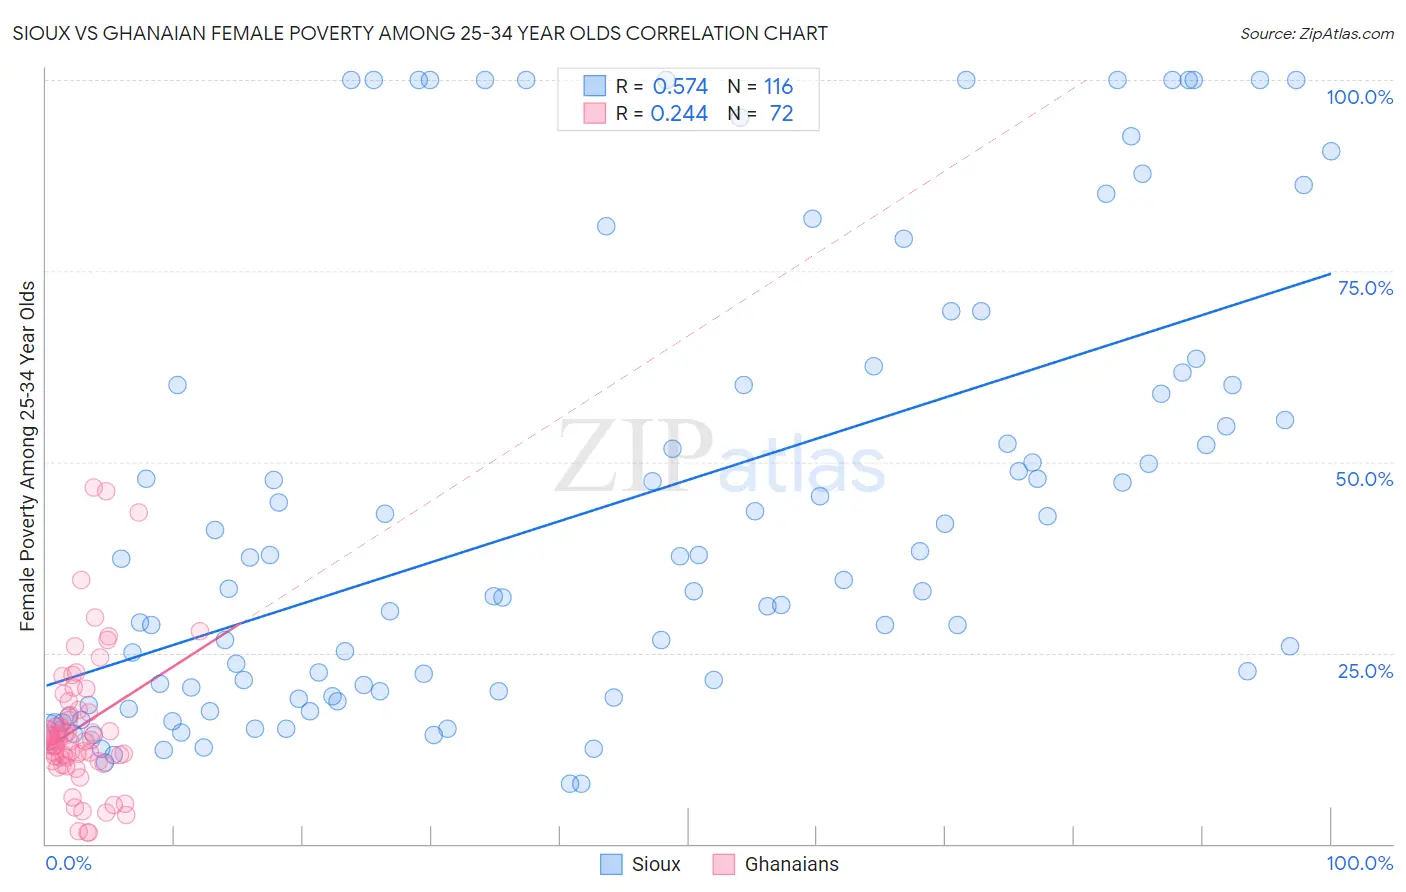 Sioux vs Ghanaian Female Poverty Among 25-34 Year Olds